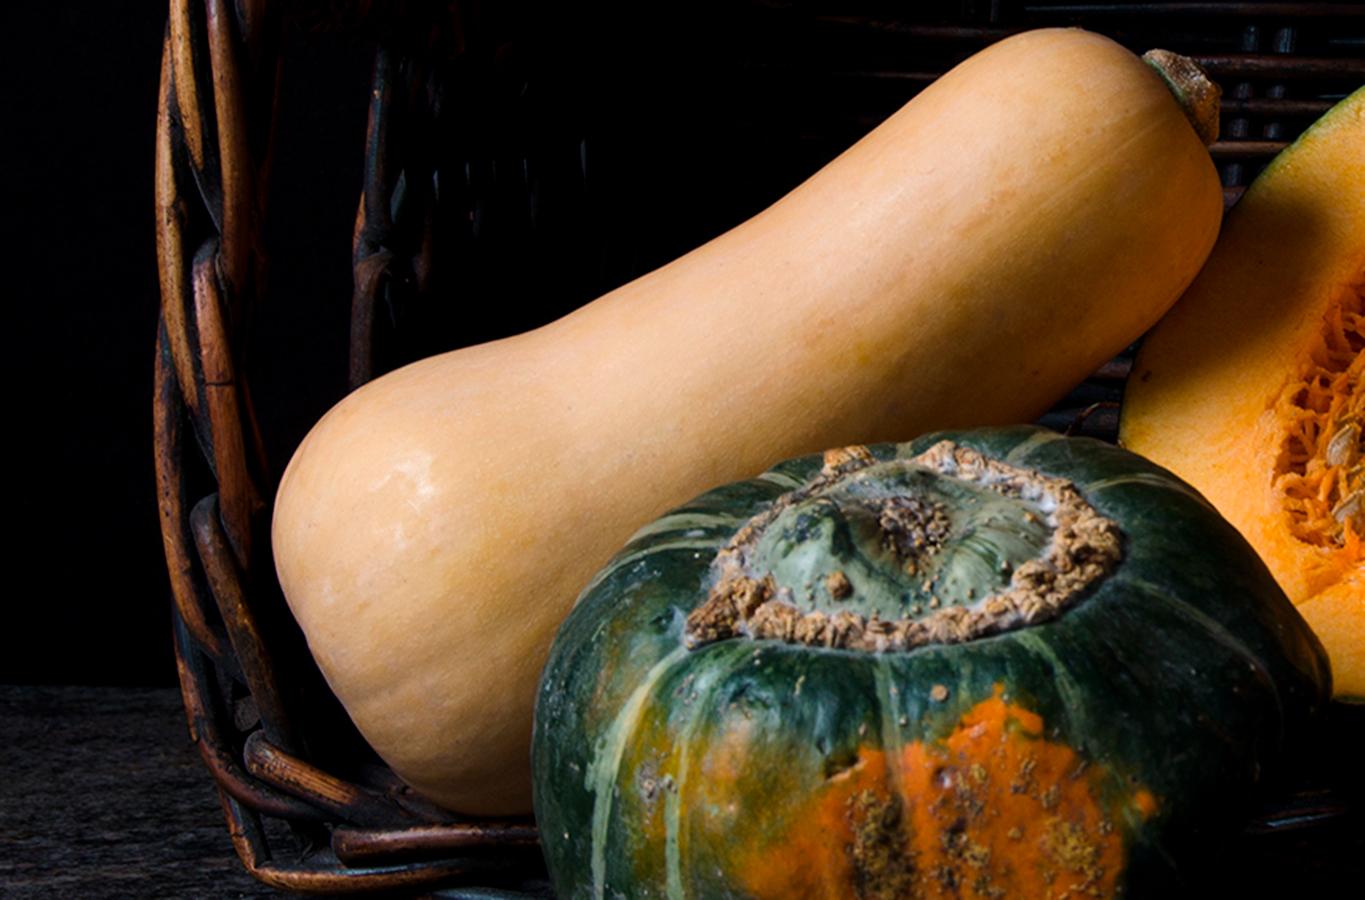 Pumpkin. From The Bodegones  still life color photography series - Photograph by Dora Franco